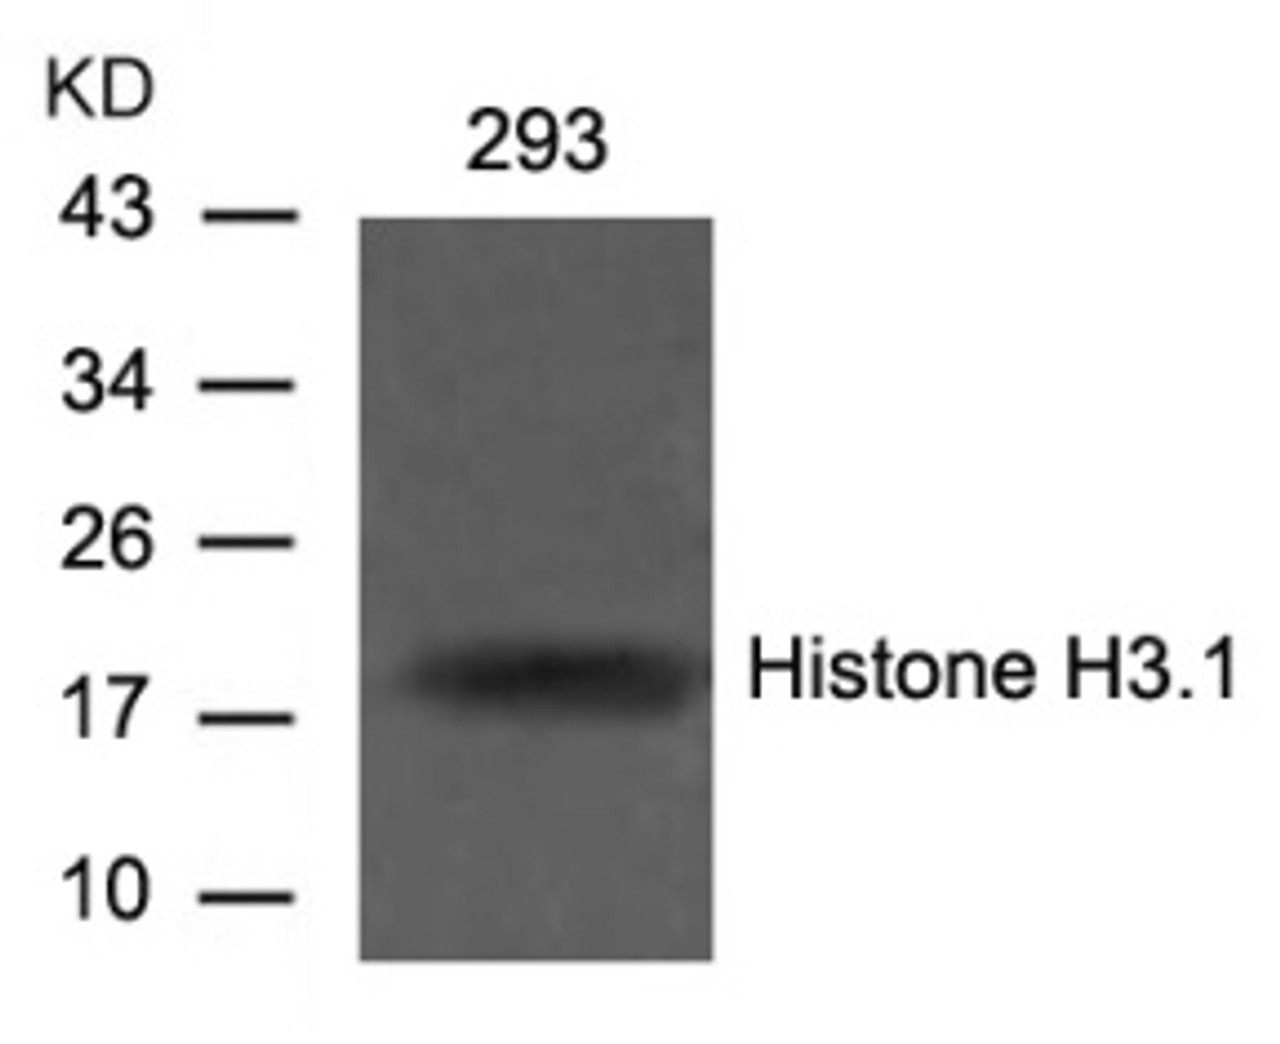 Western blot analysis of lysed extracts from 293 cells using Histone H3.1 (Ab-10) .